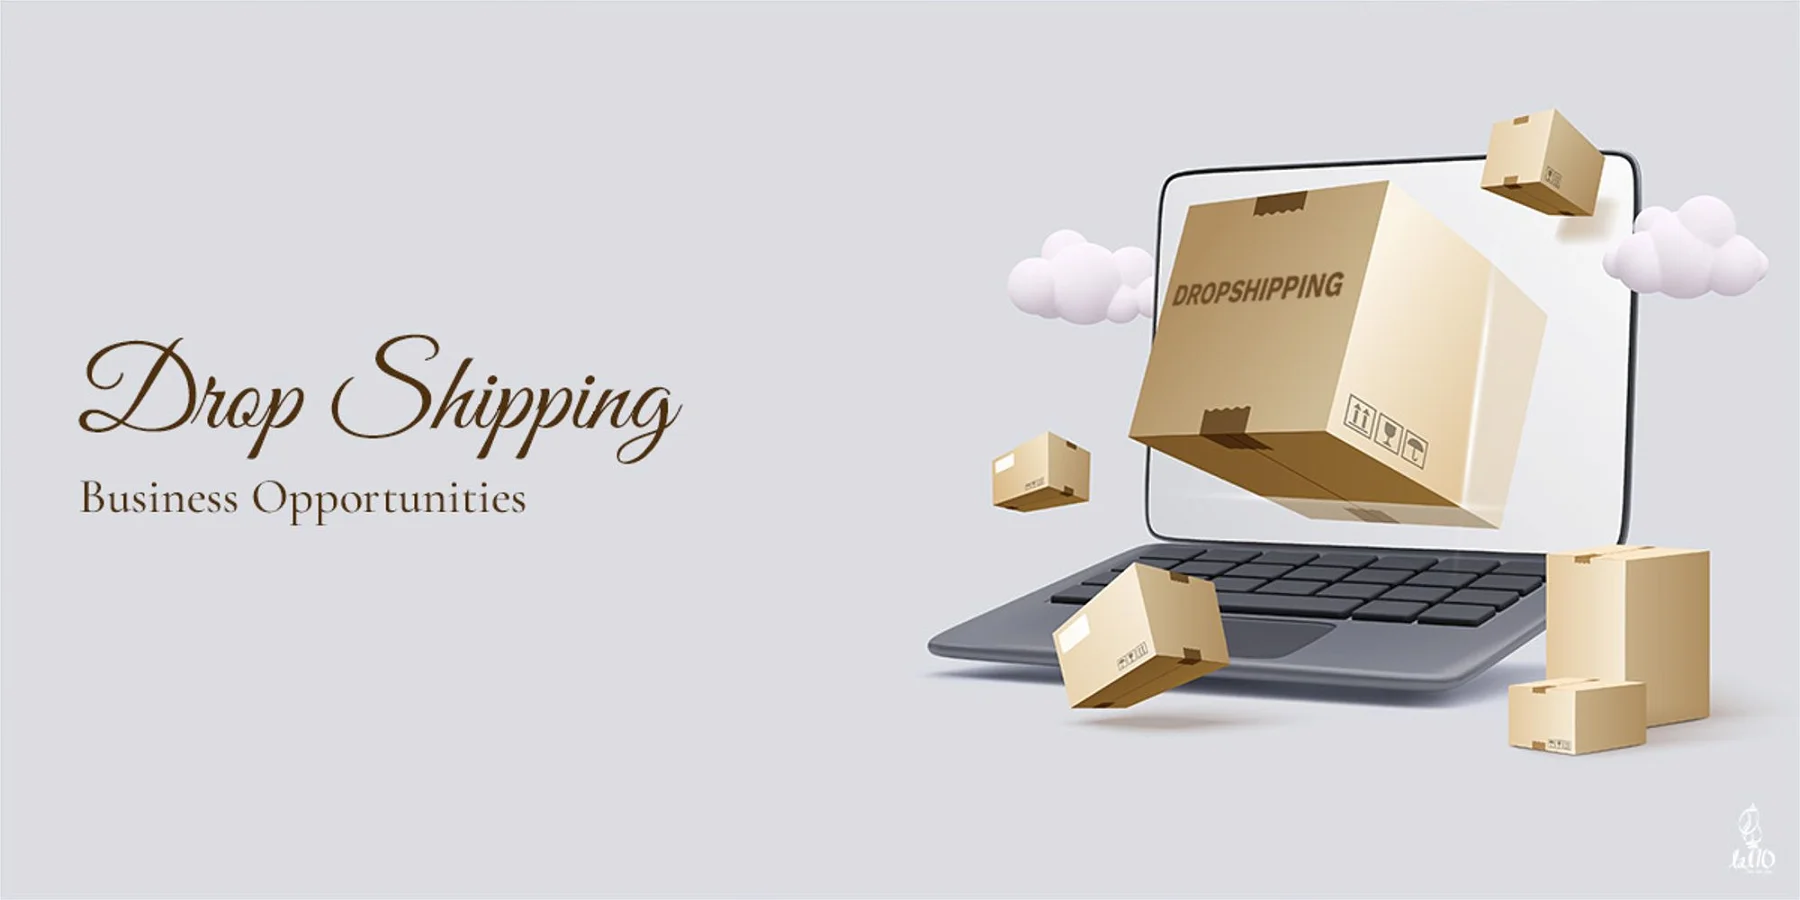 Driap Shipping

Business Opportunities